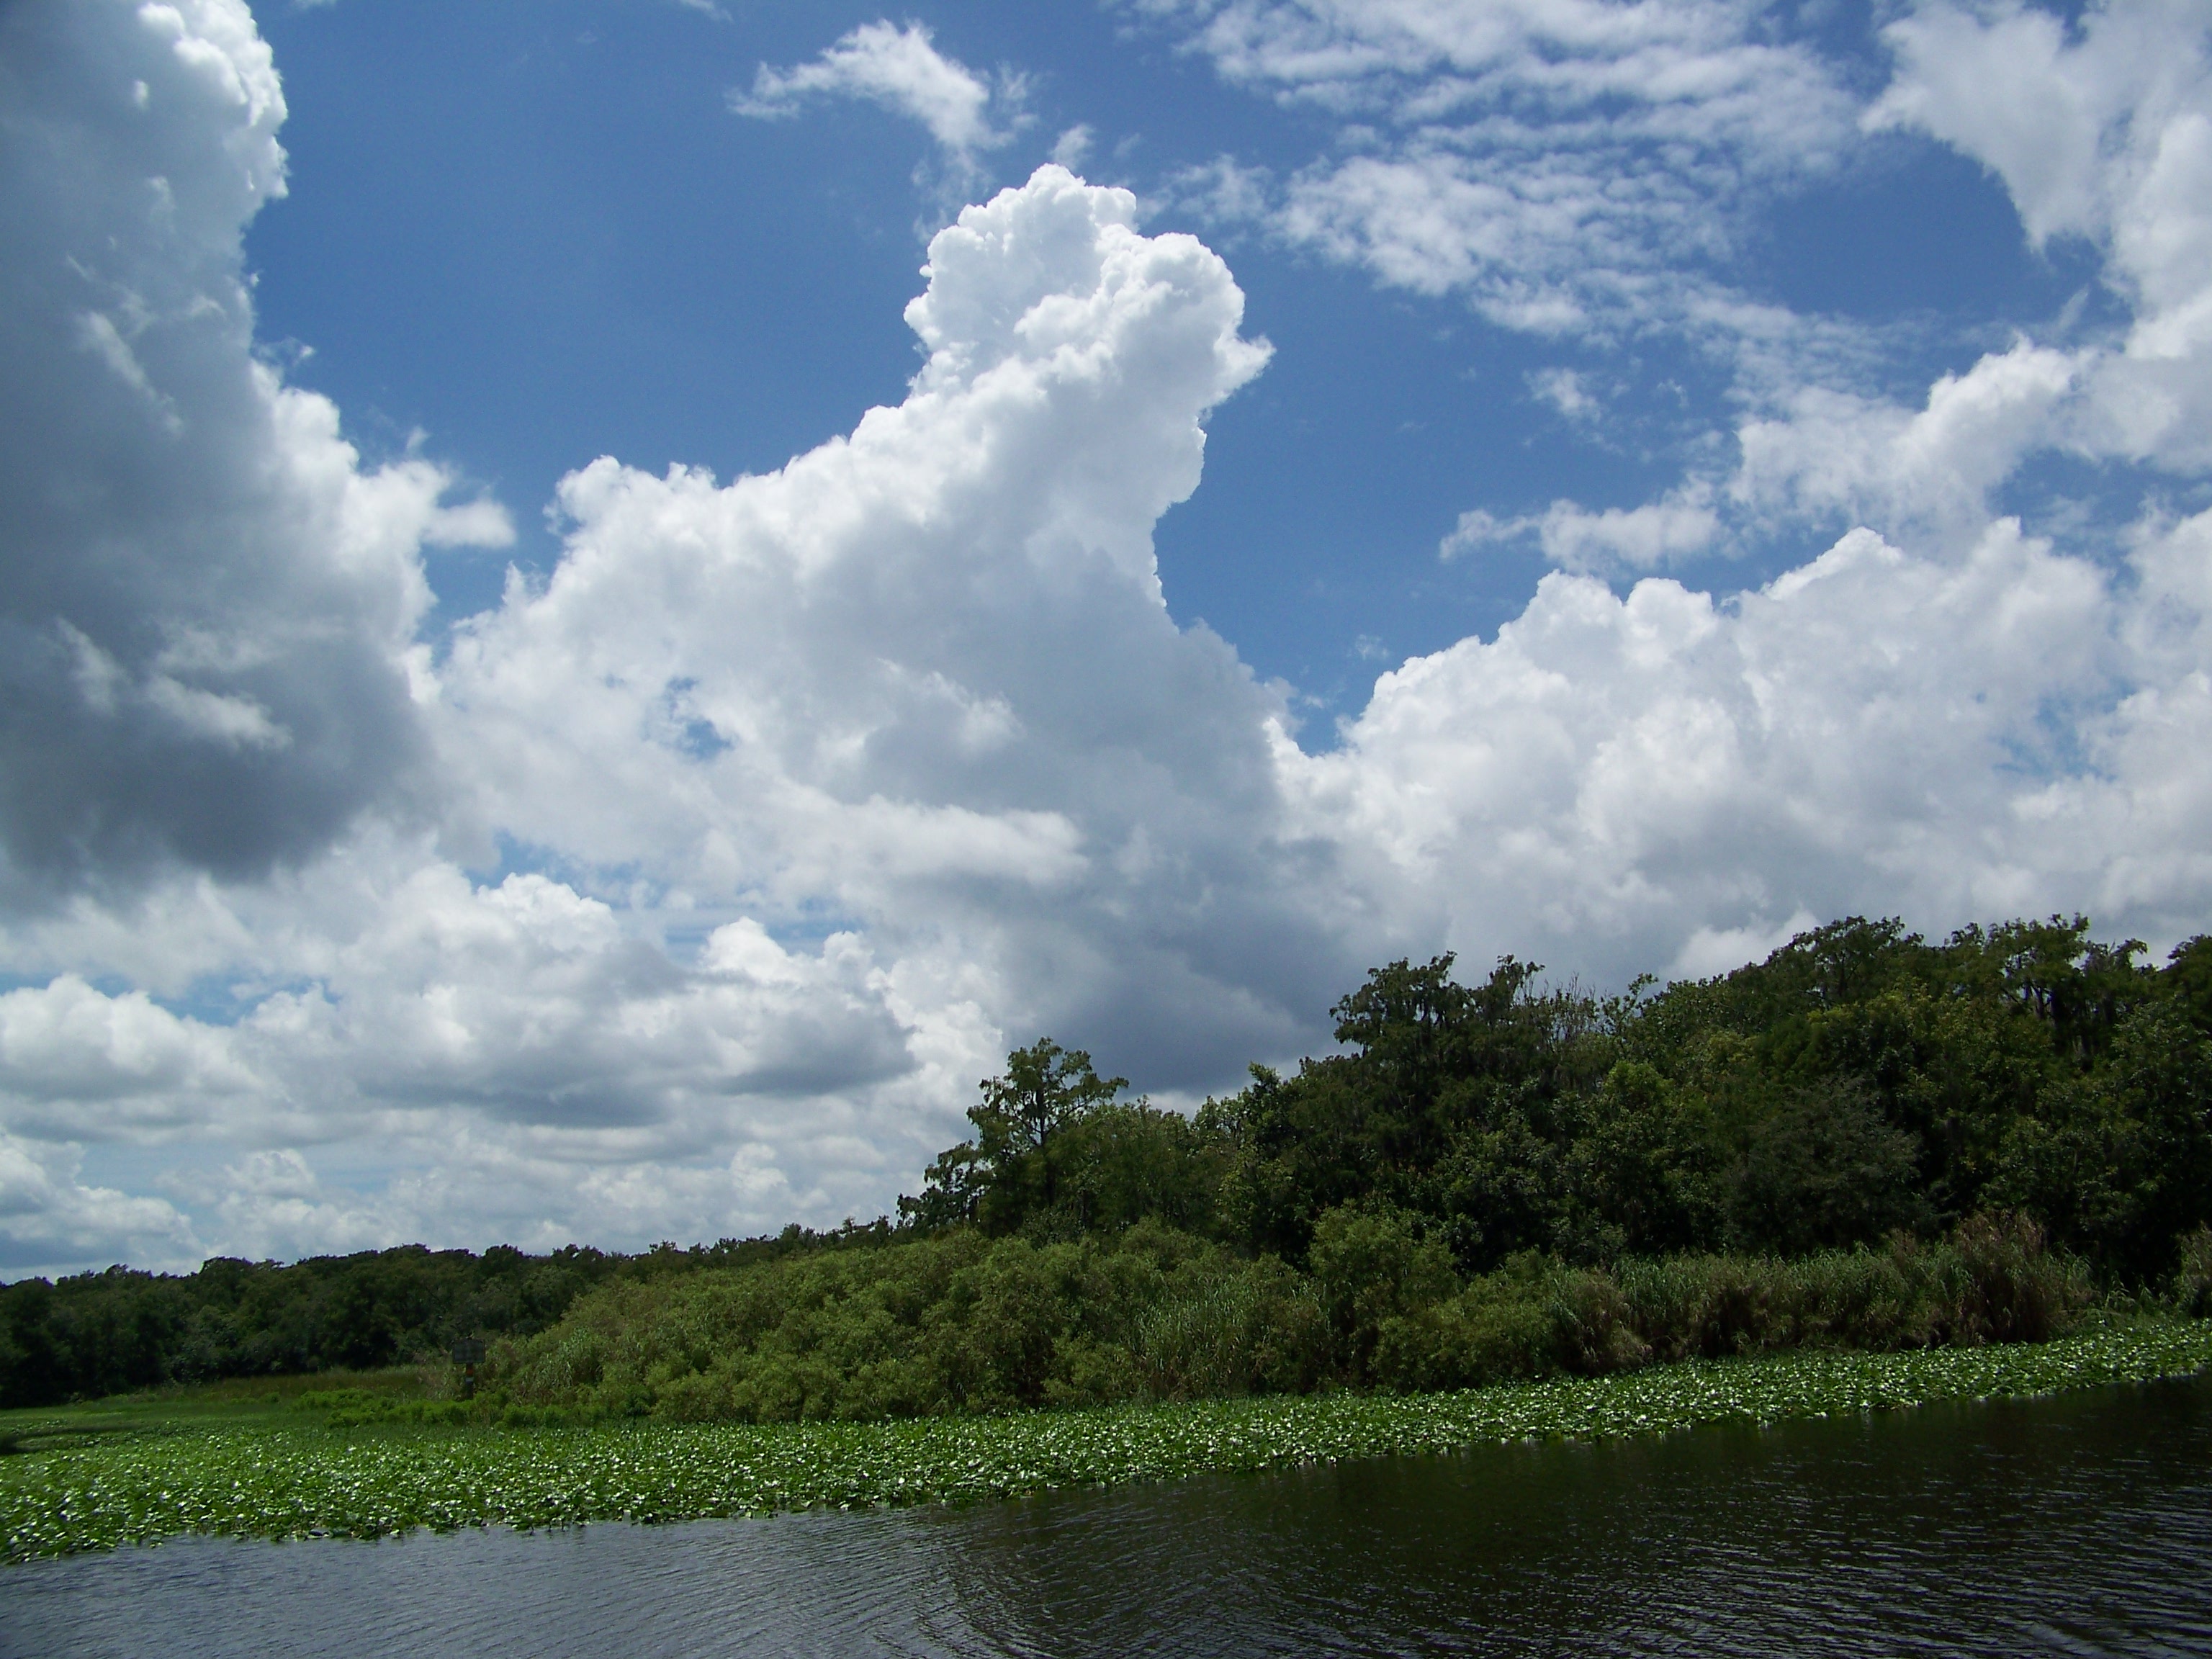 Cloud artistry above the St. John's River...Lions, and tigers and bears...OH...so wonderful to explore.